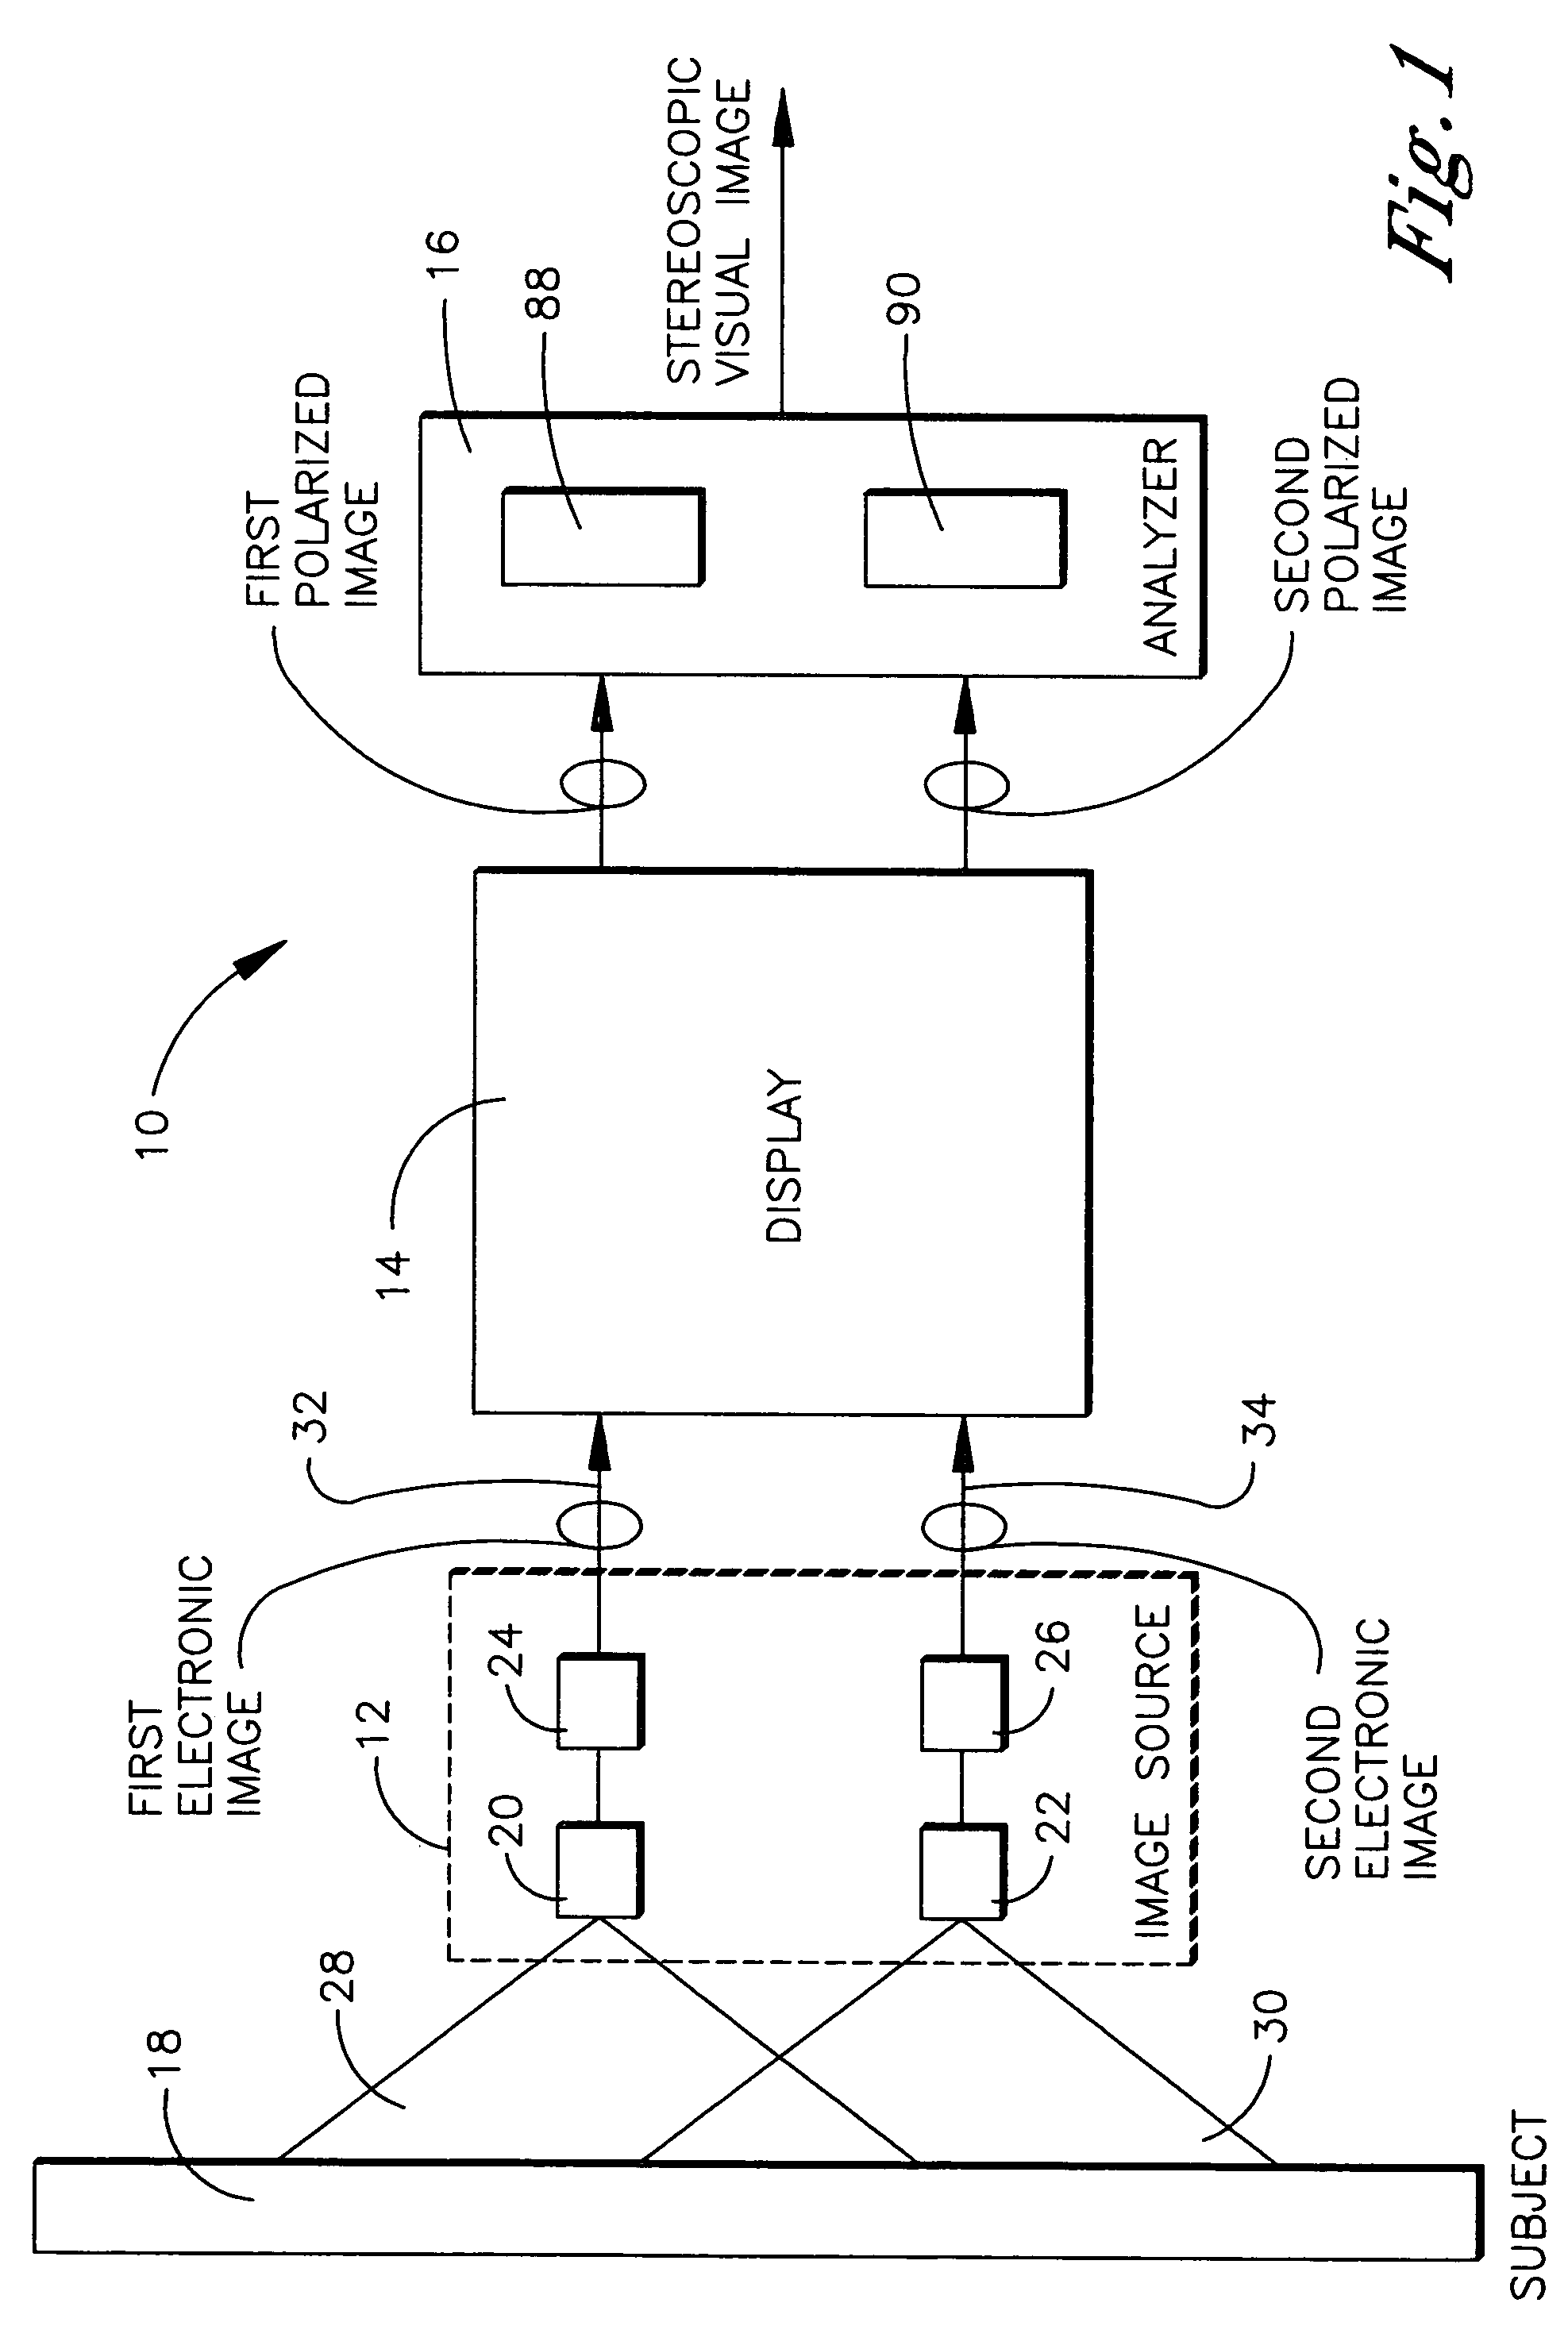 Stereoscopic imaging assembly employing a flat panel display